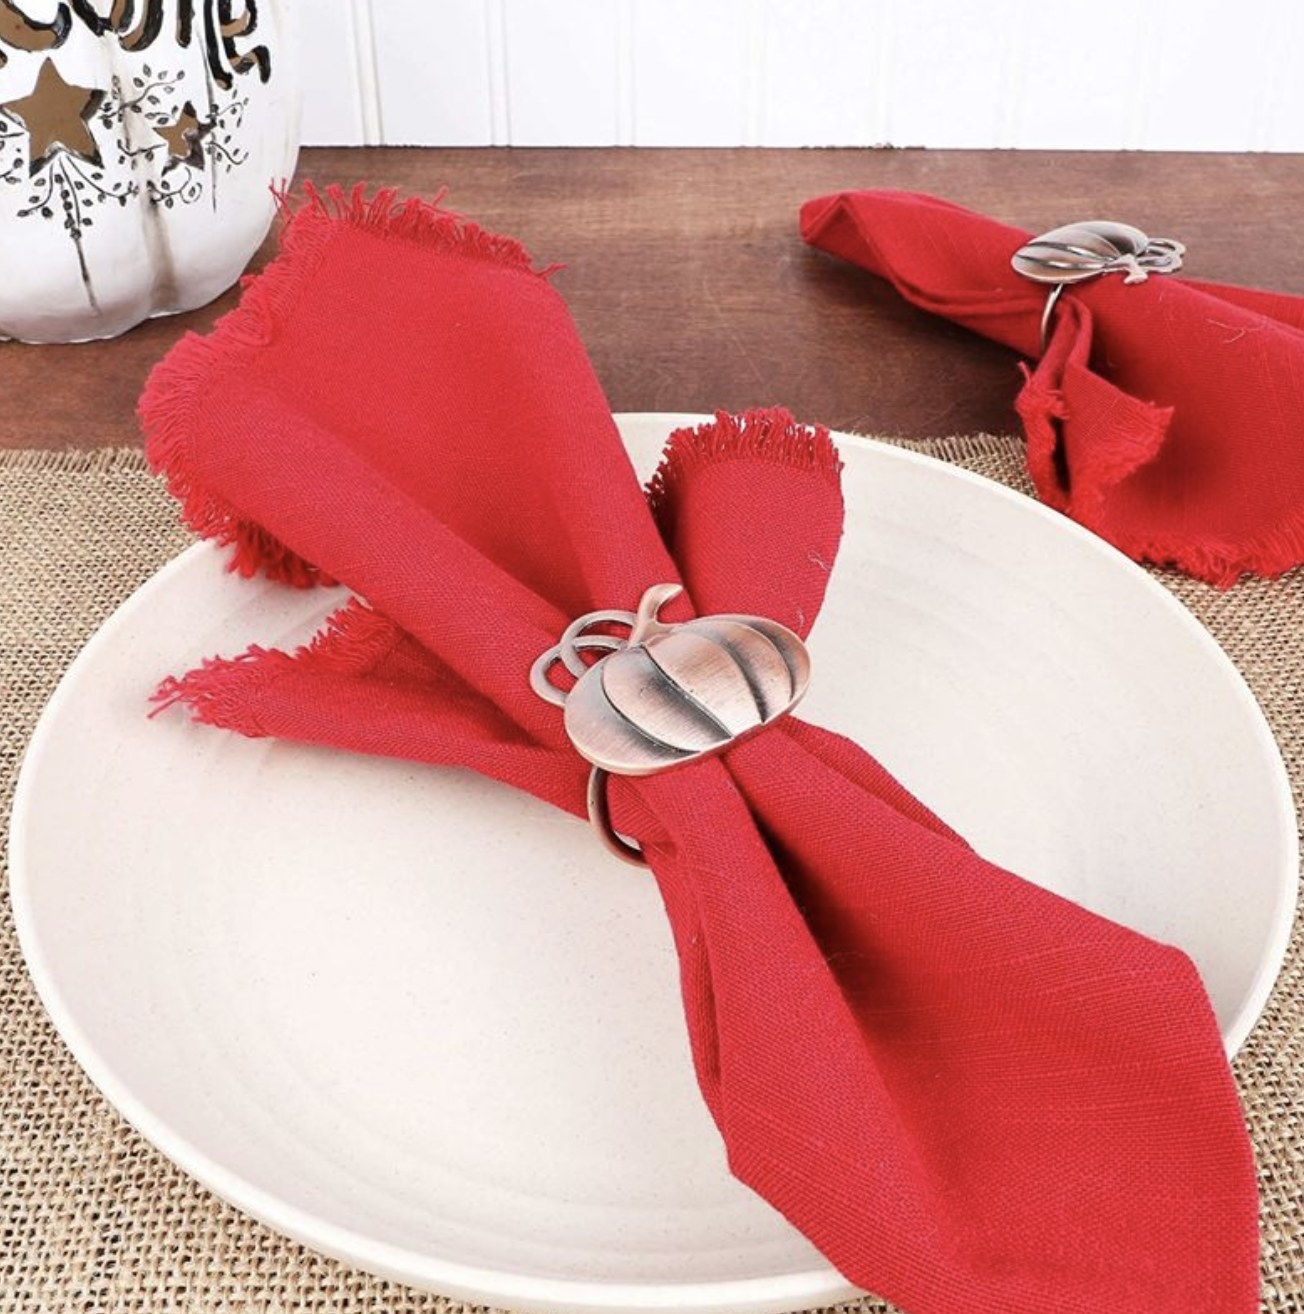 A plate with a red napkin displayed with the bronze pumpkin ring